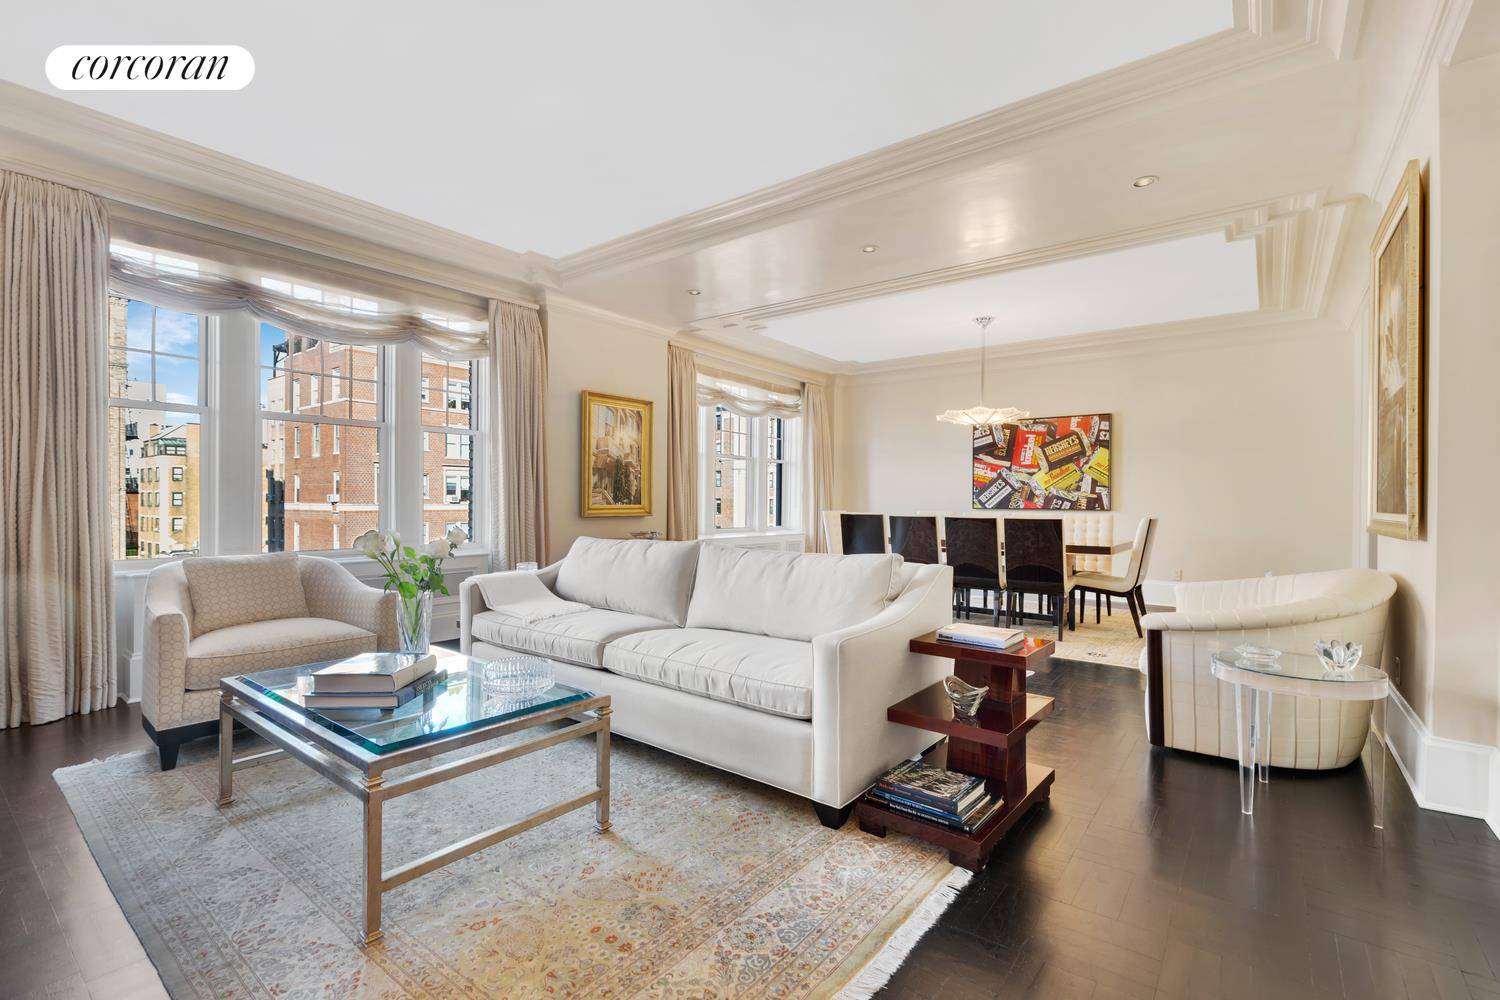 Pied a terres are permitted in this mint, sundrenched, grand scale home over looking Park Avenue.